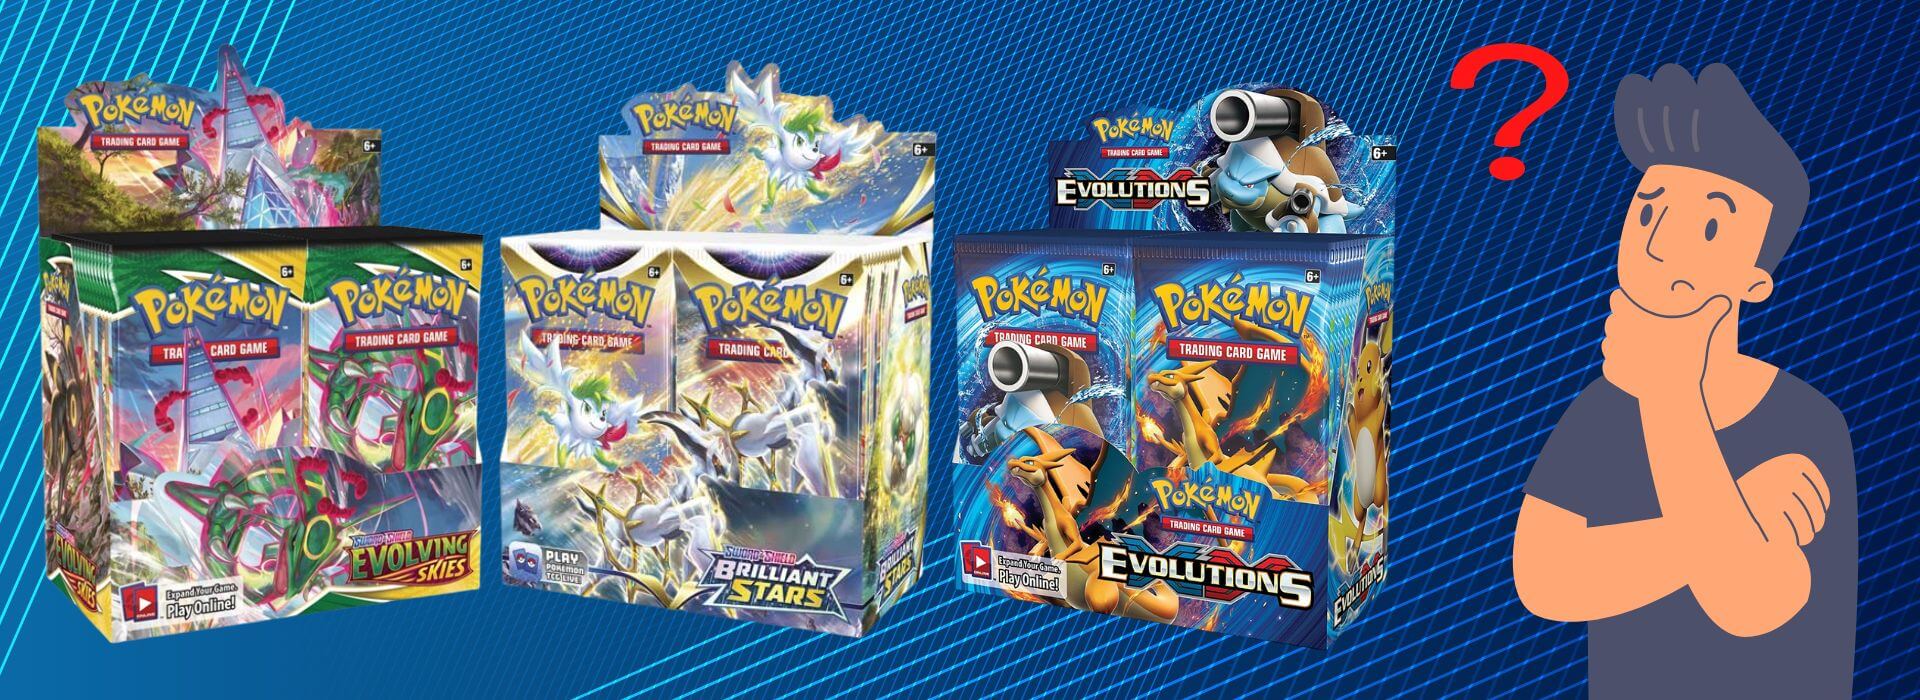 Where to buy pokemon booster boxes in canada